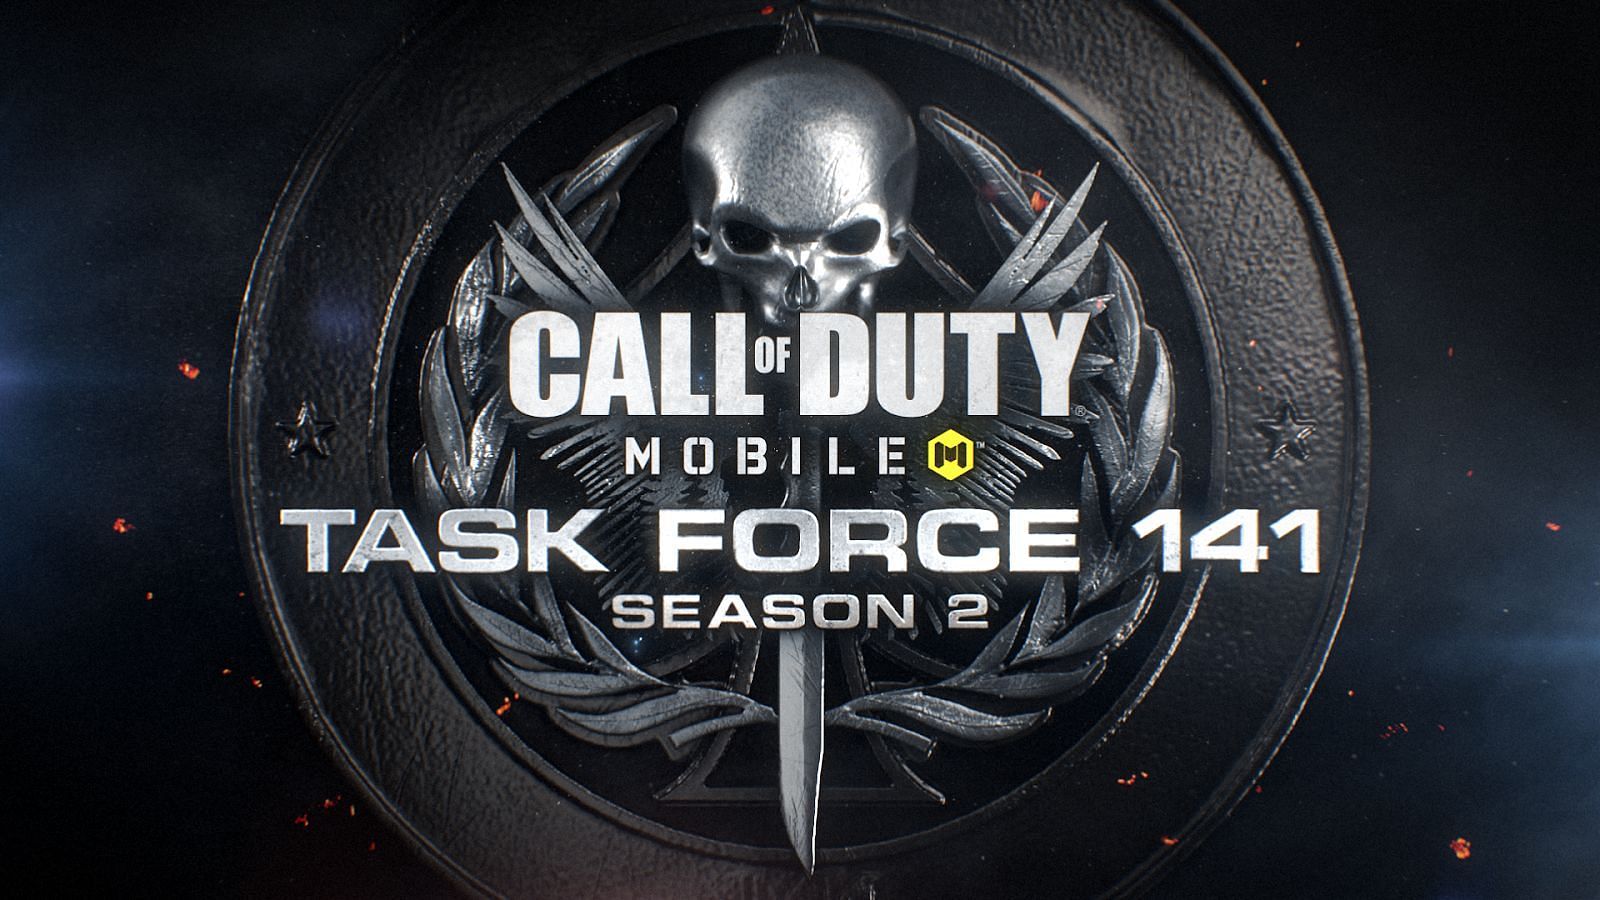 Season 2 of 2022, Task Force 141, has been officially announced and COD Mobile players can check out all the new content being included in the upcoming season (Image via Activision)